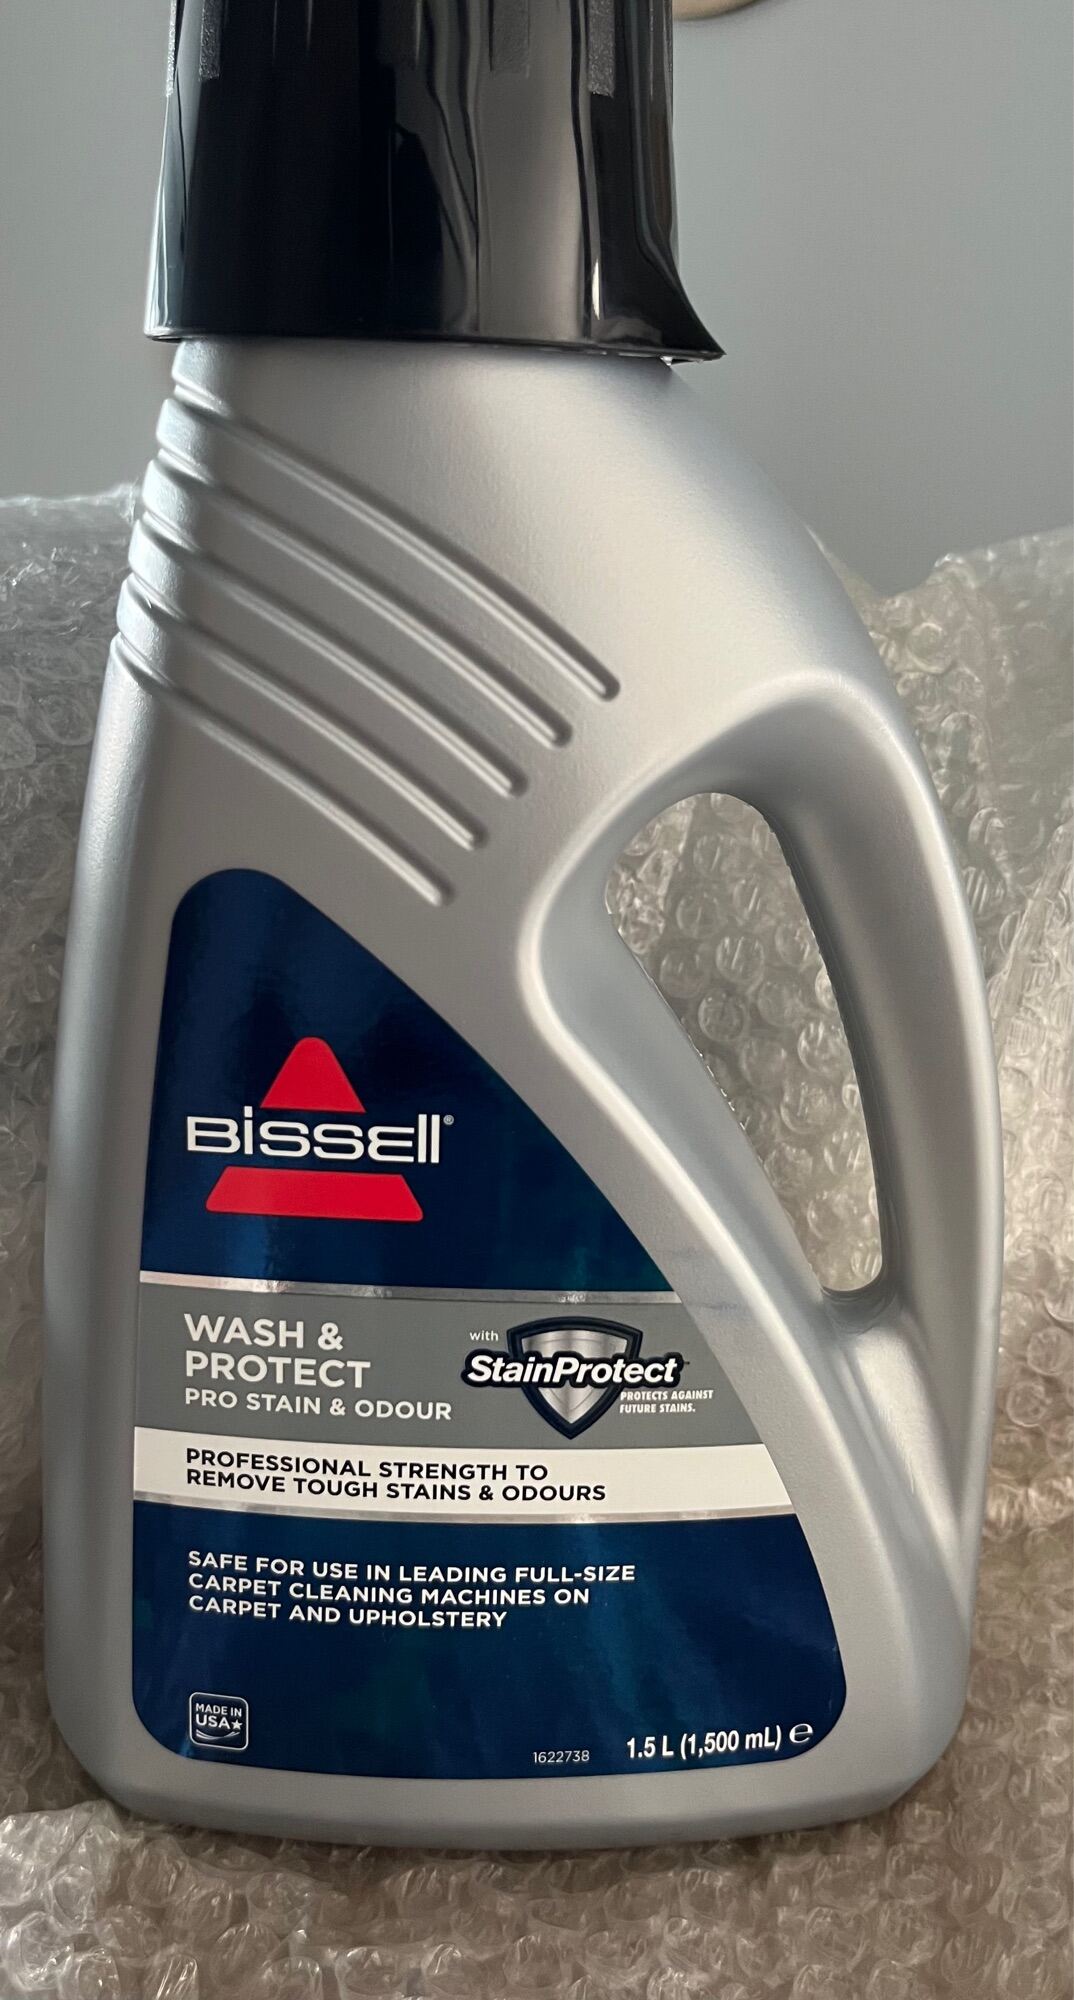 Bissell Wash and Protect 1.5l